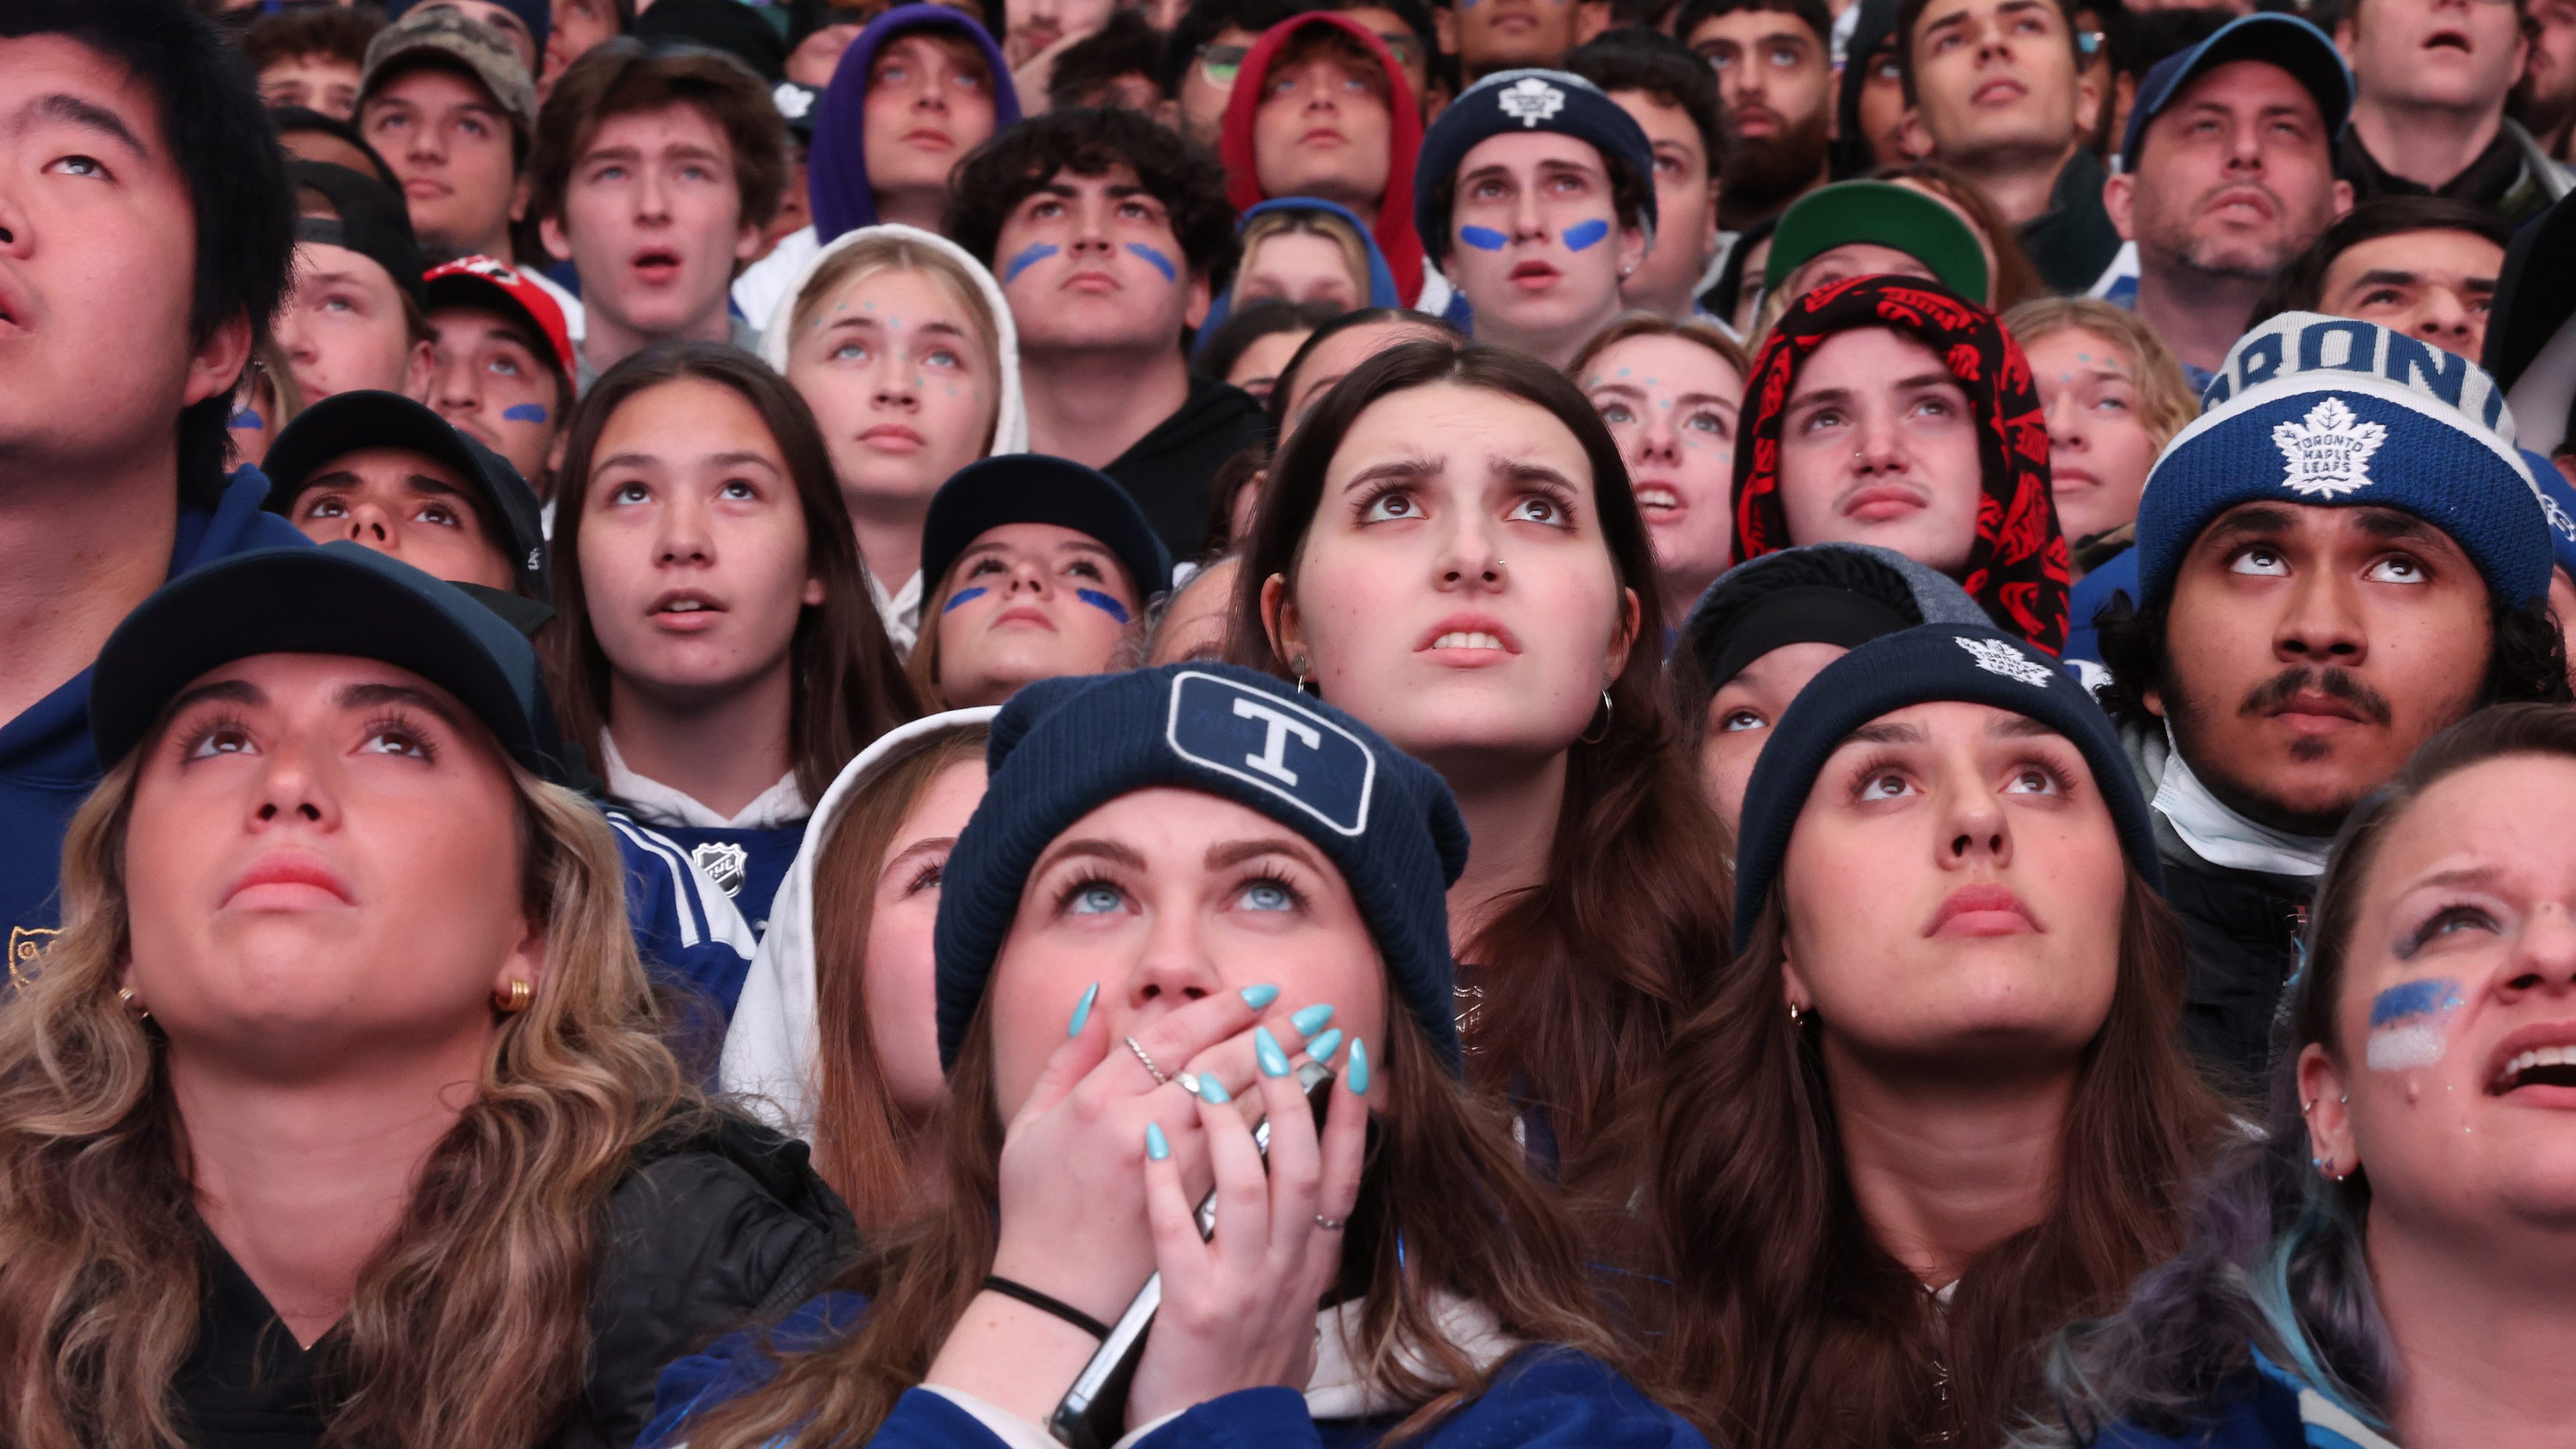 Toronto Maple Leafs fans watch, cheer, react to game 6 of their first round NHL playoffs series against Tampa Bay Lightning on the big screen in Maple Leaf Square outside Scotiabank Arena in Toronto. April 29, 2023.